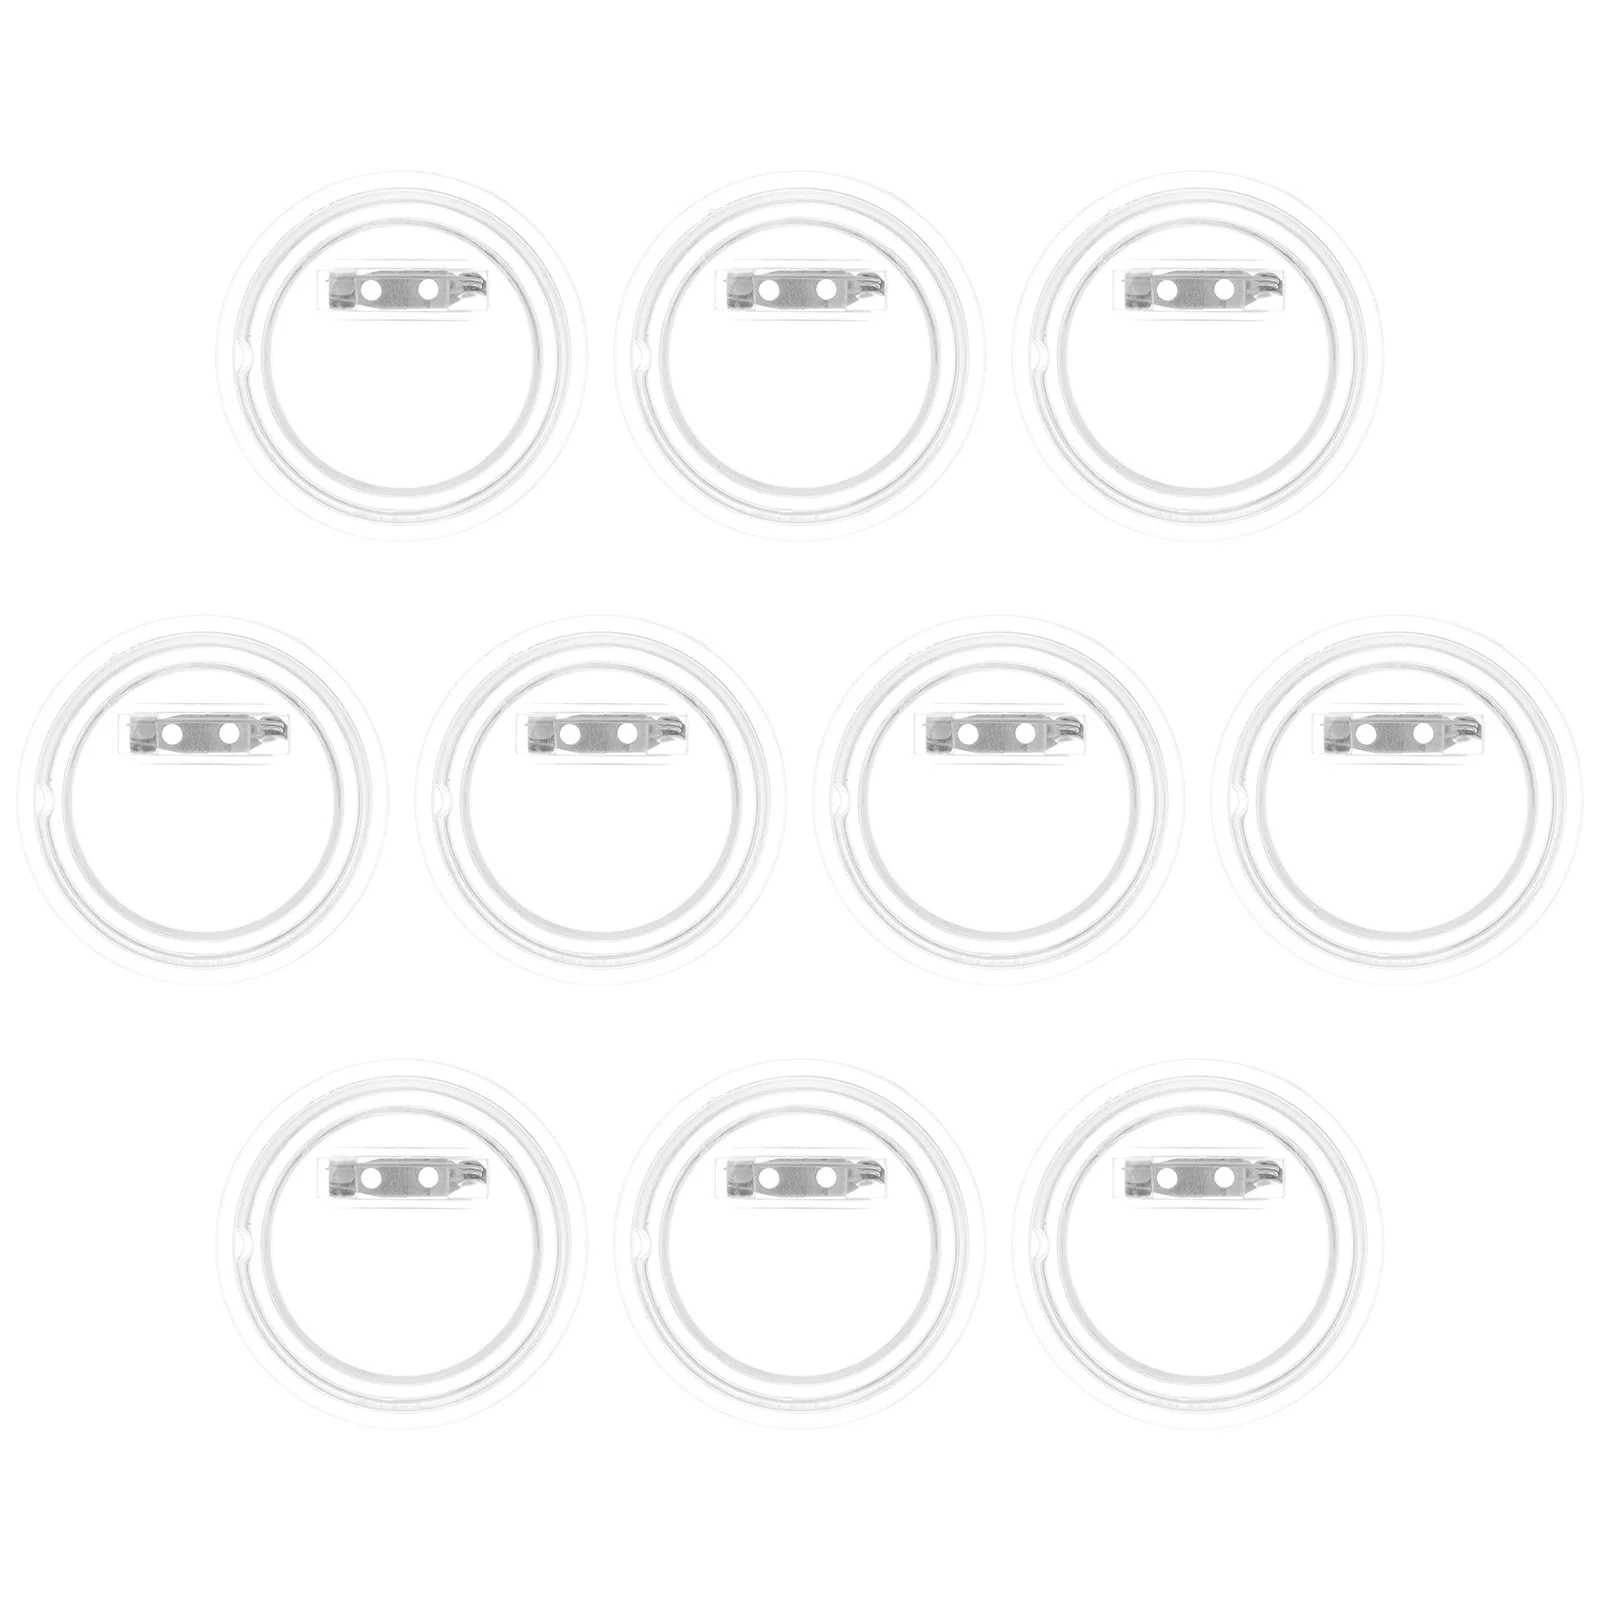 10pcs Clear Button Pin Diy Badge Buttons Pin Making Materials Empty Acrylic Photo Badge Parts